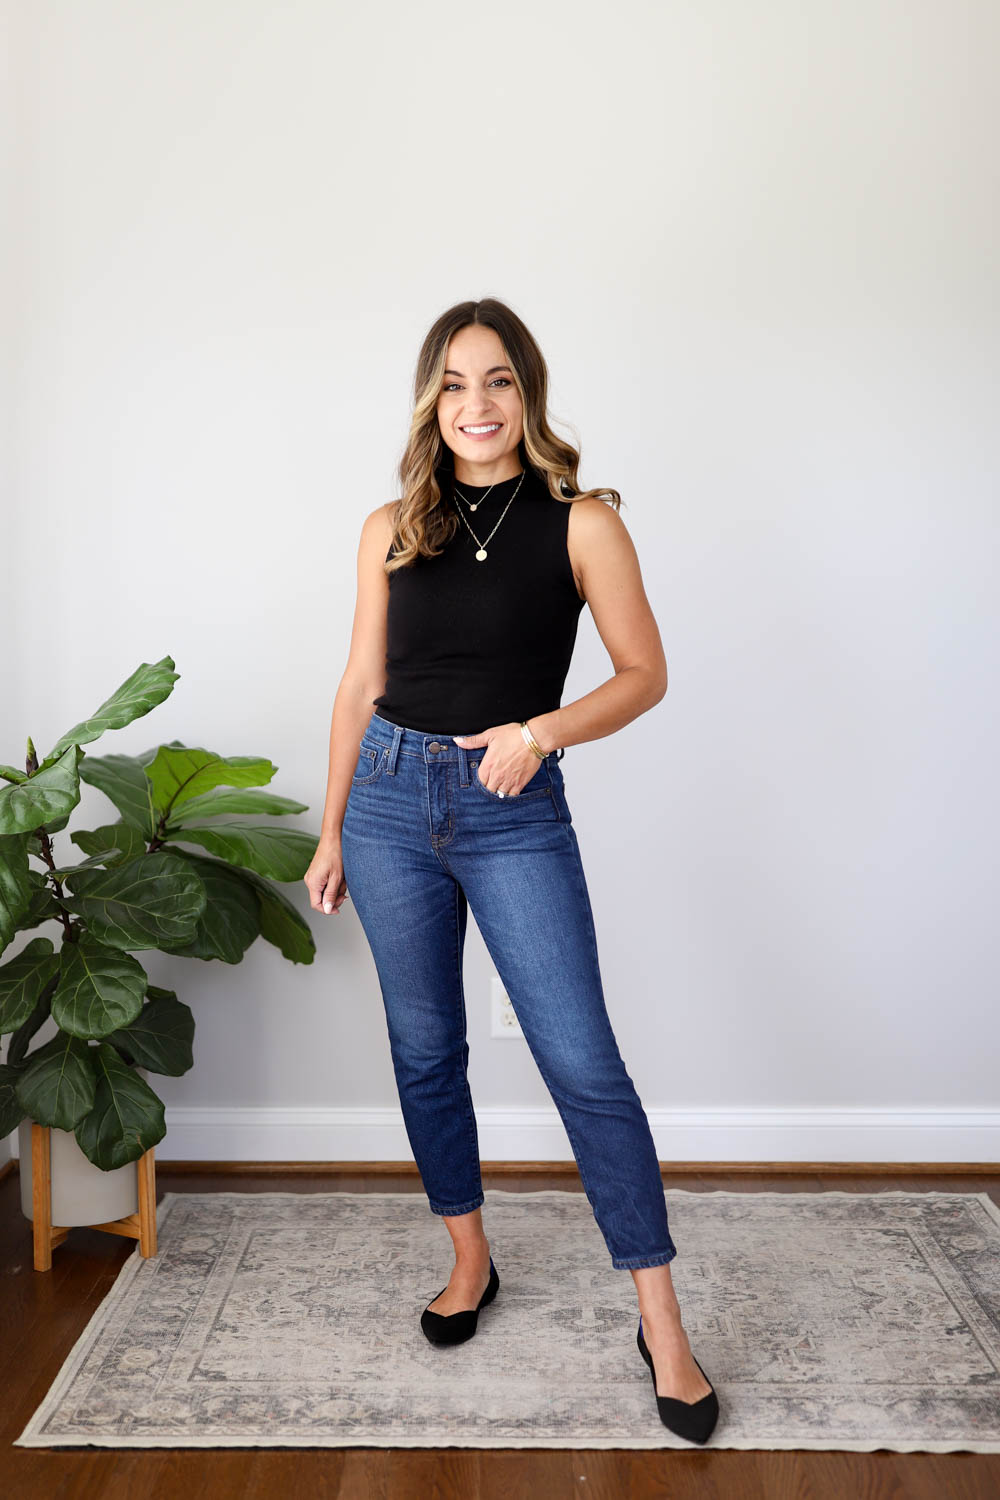 Are Jeans Business Casual? 4 Tips for Wearing Jeans to Work